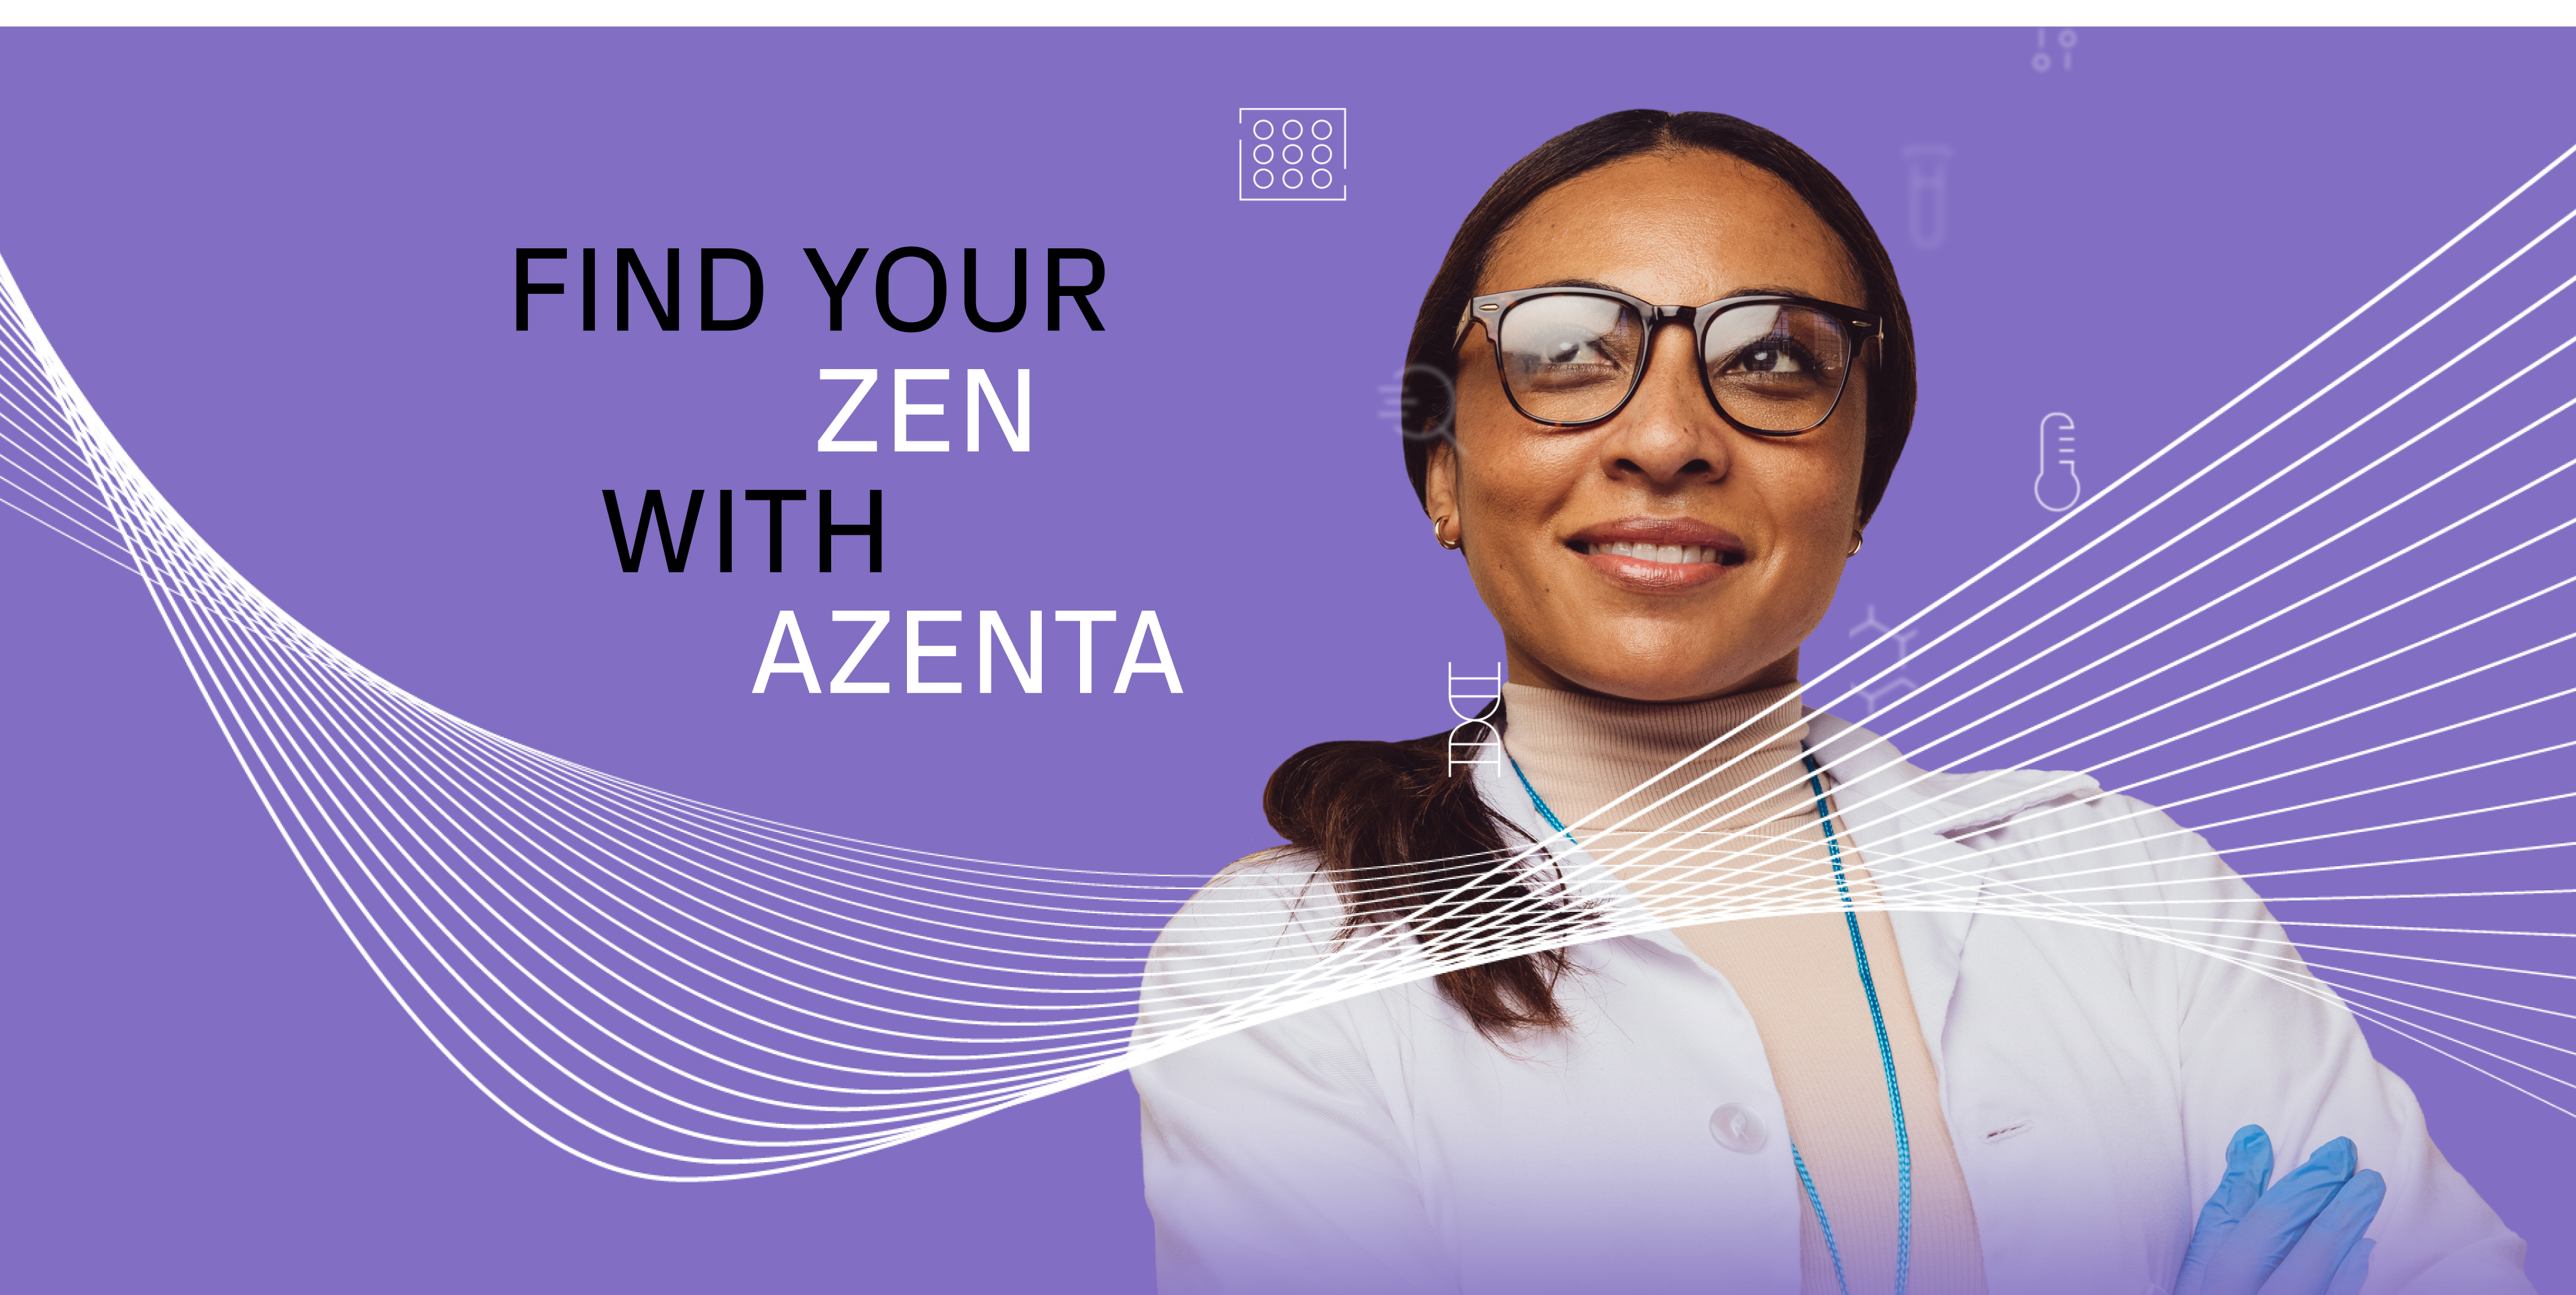 A scientist in front of a dynamic purple background. Text: Find your zen with Azenta